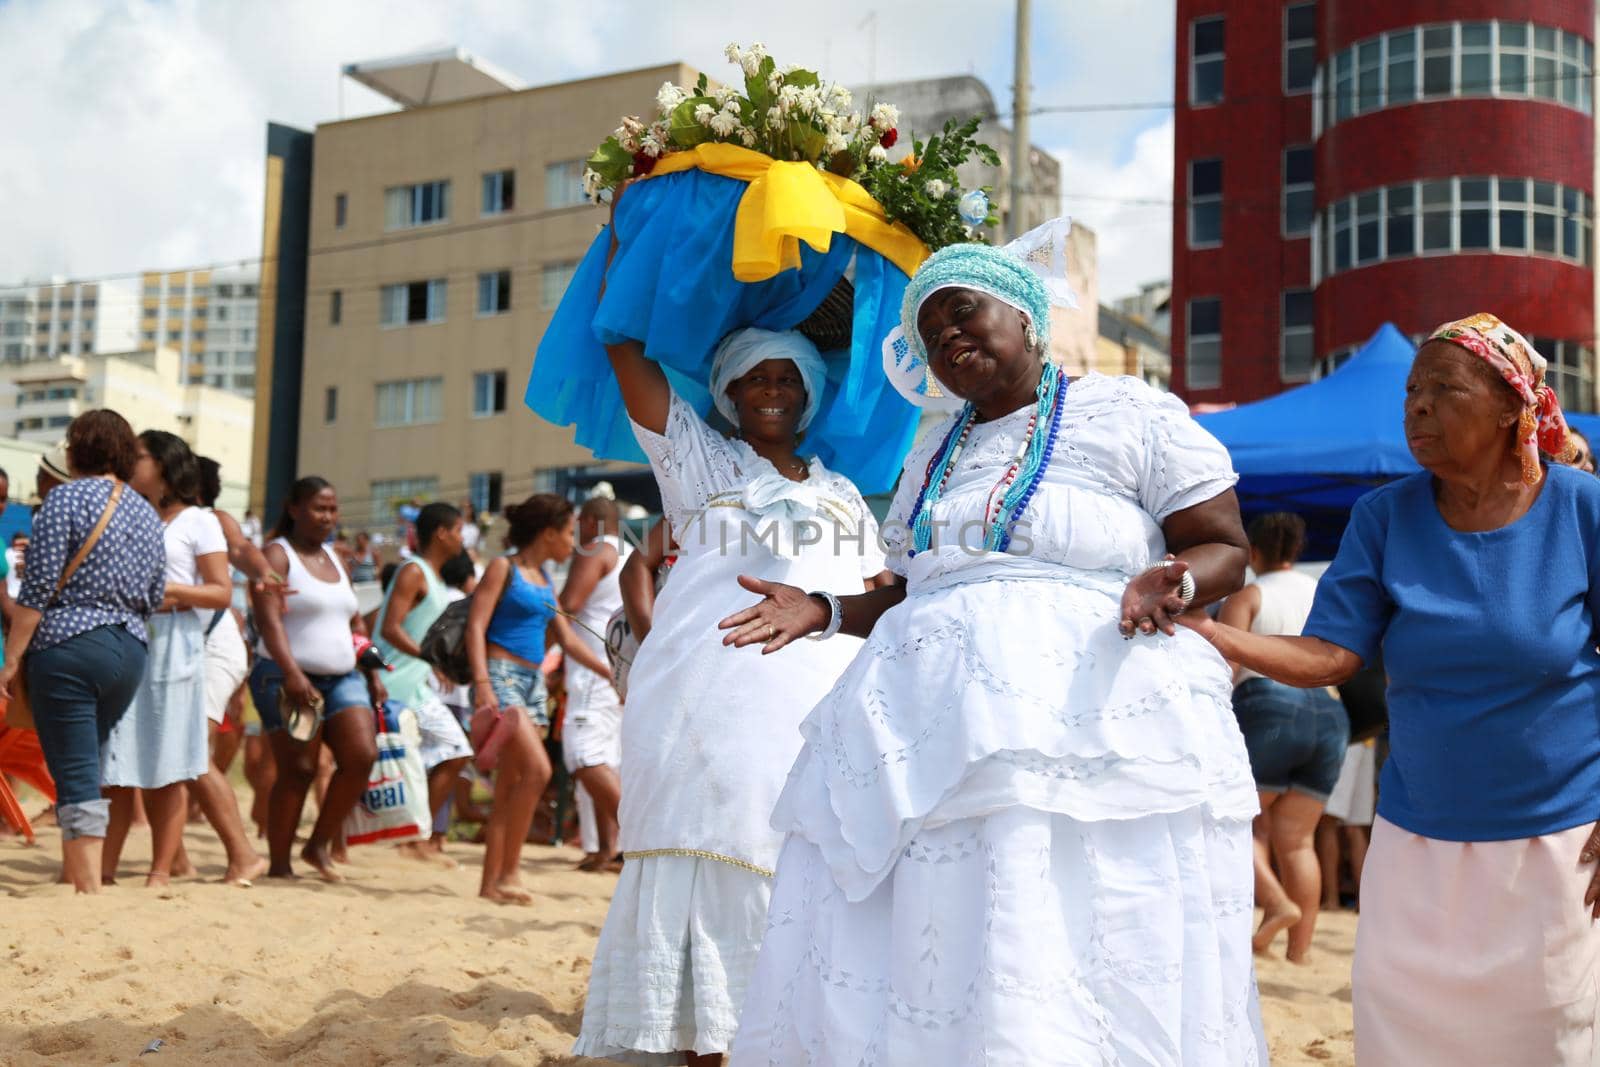 salvador, bahia, brazil - february 2, 2015: Candomble devotees and supporters of the African matriaz religion pay tribute to the orixa Yemanja in the city of Salvador.